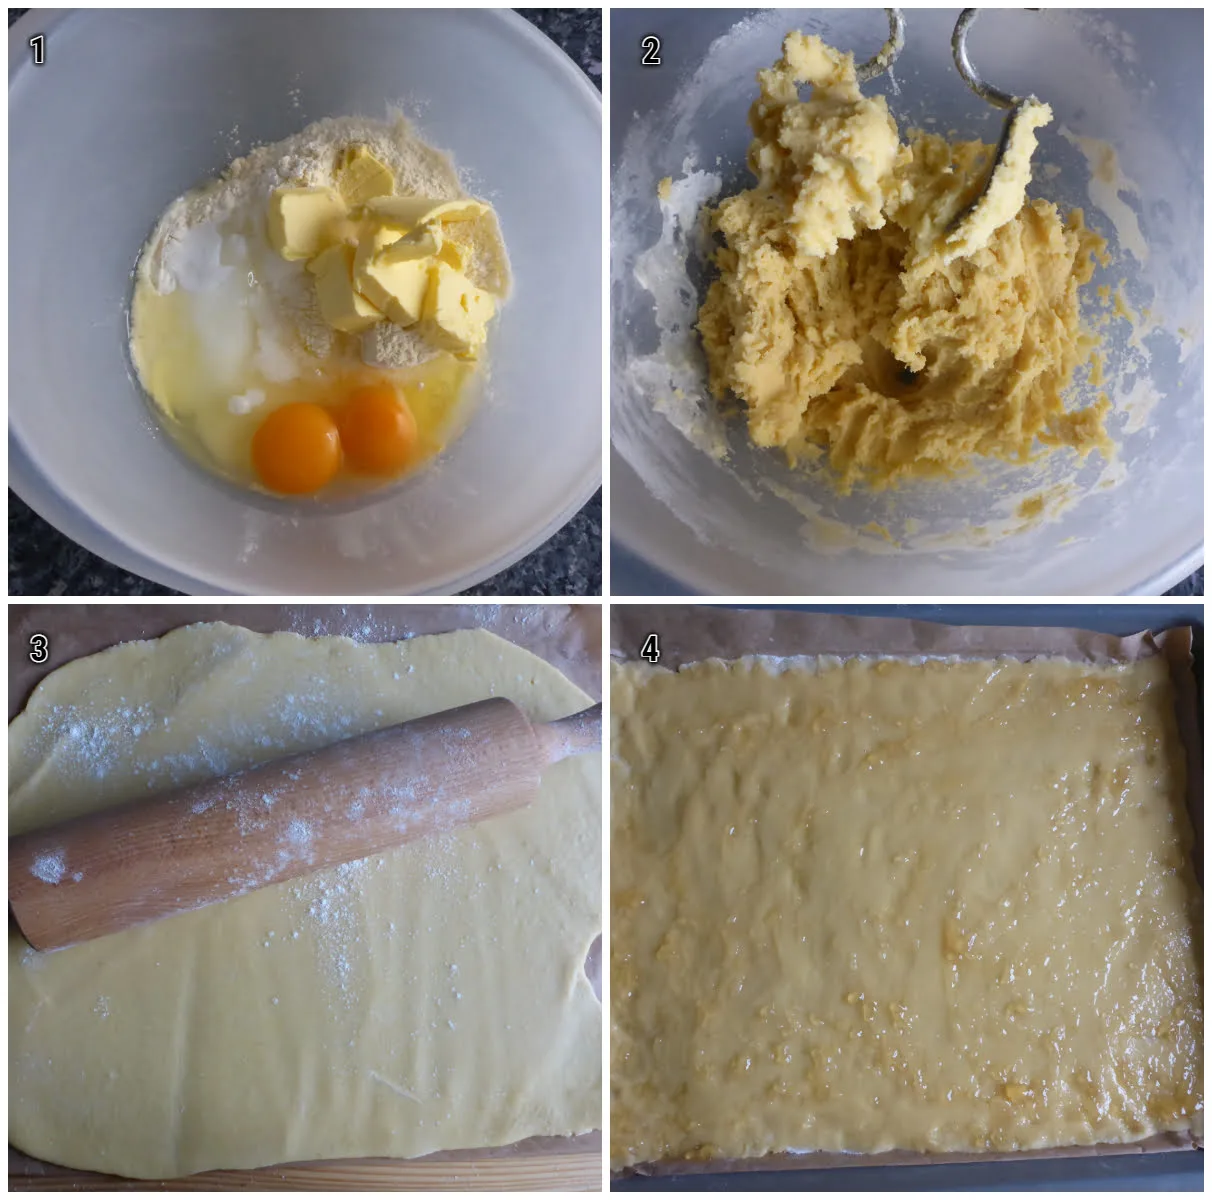 How to make shortcrust pastry, roll out the dough and spread it with jam to make German nut triangles.